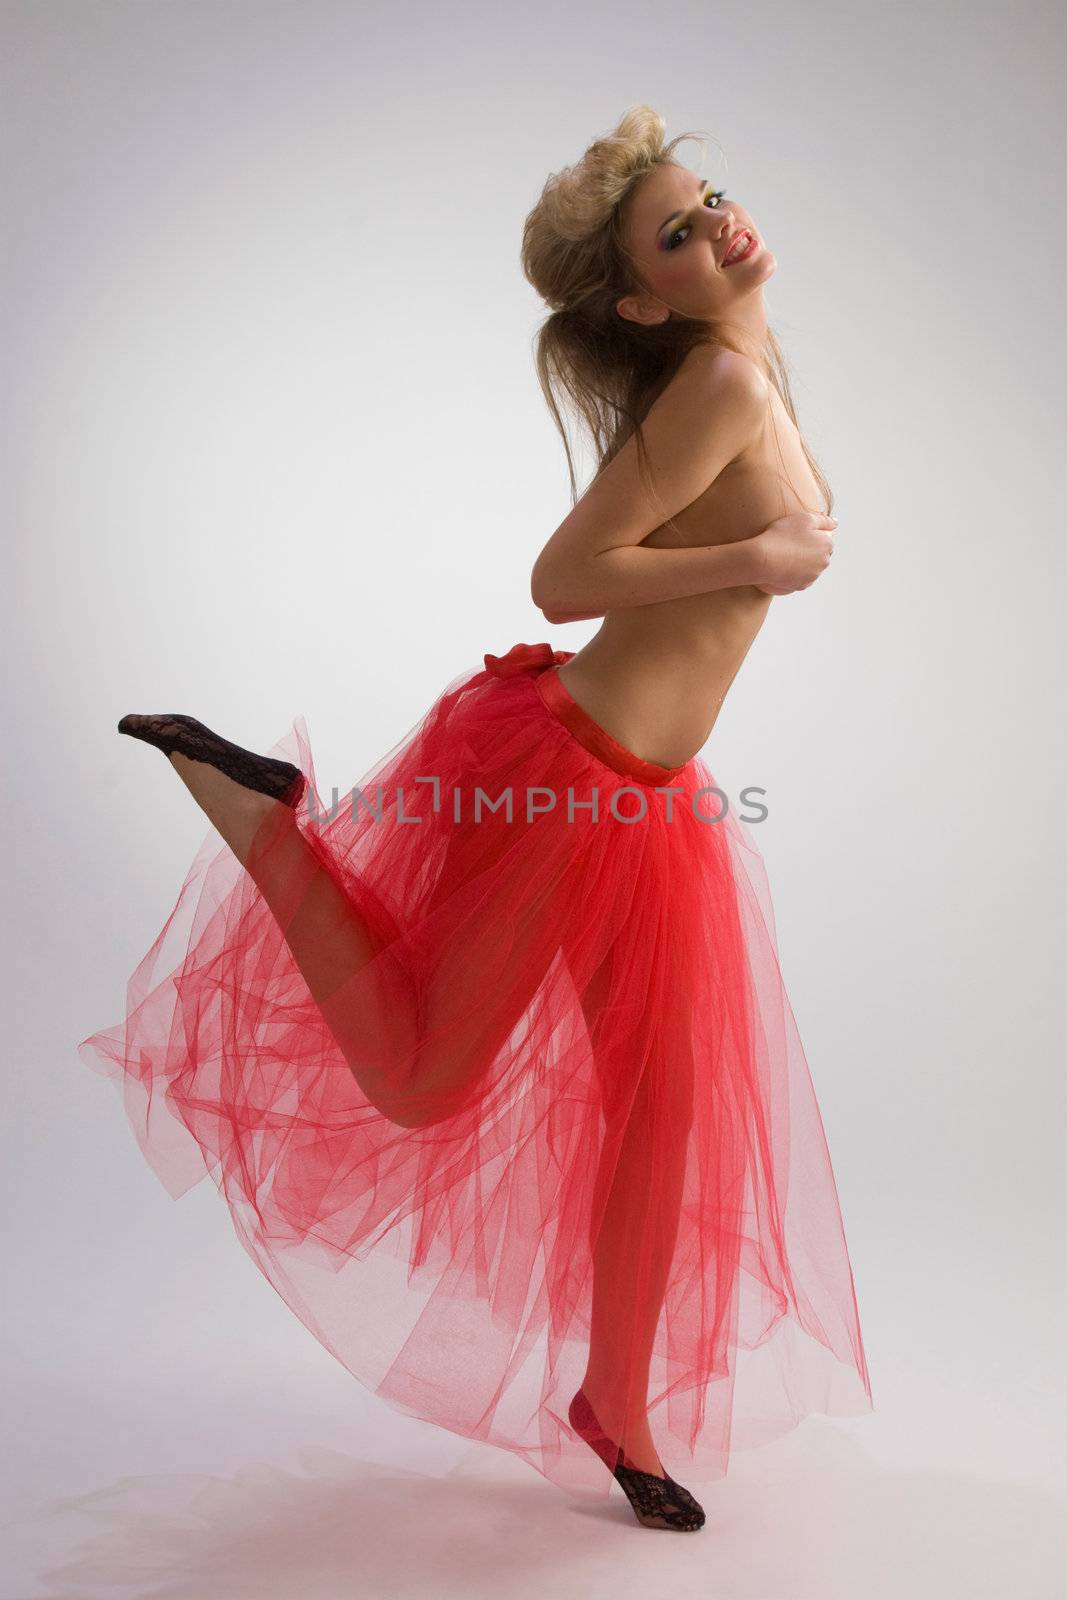 Beautiful woman in red diaphanous skirt dancing on grey background